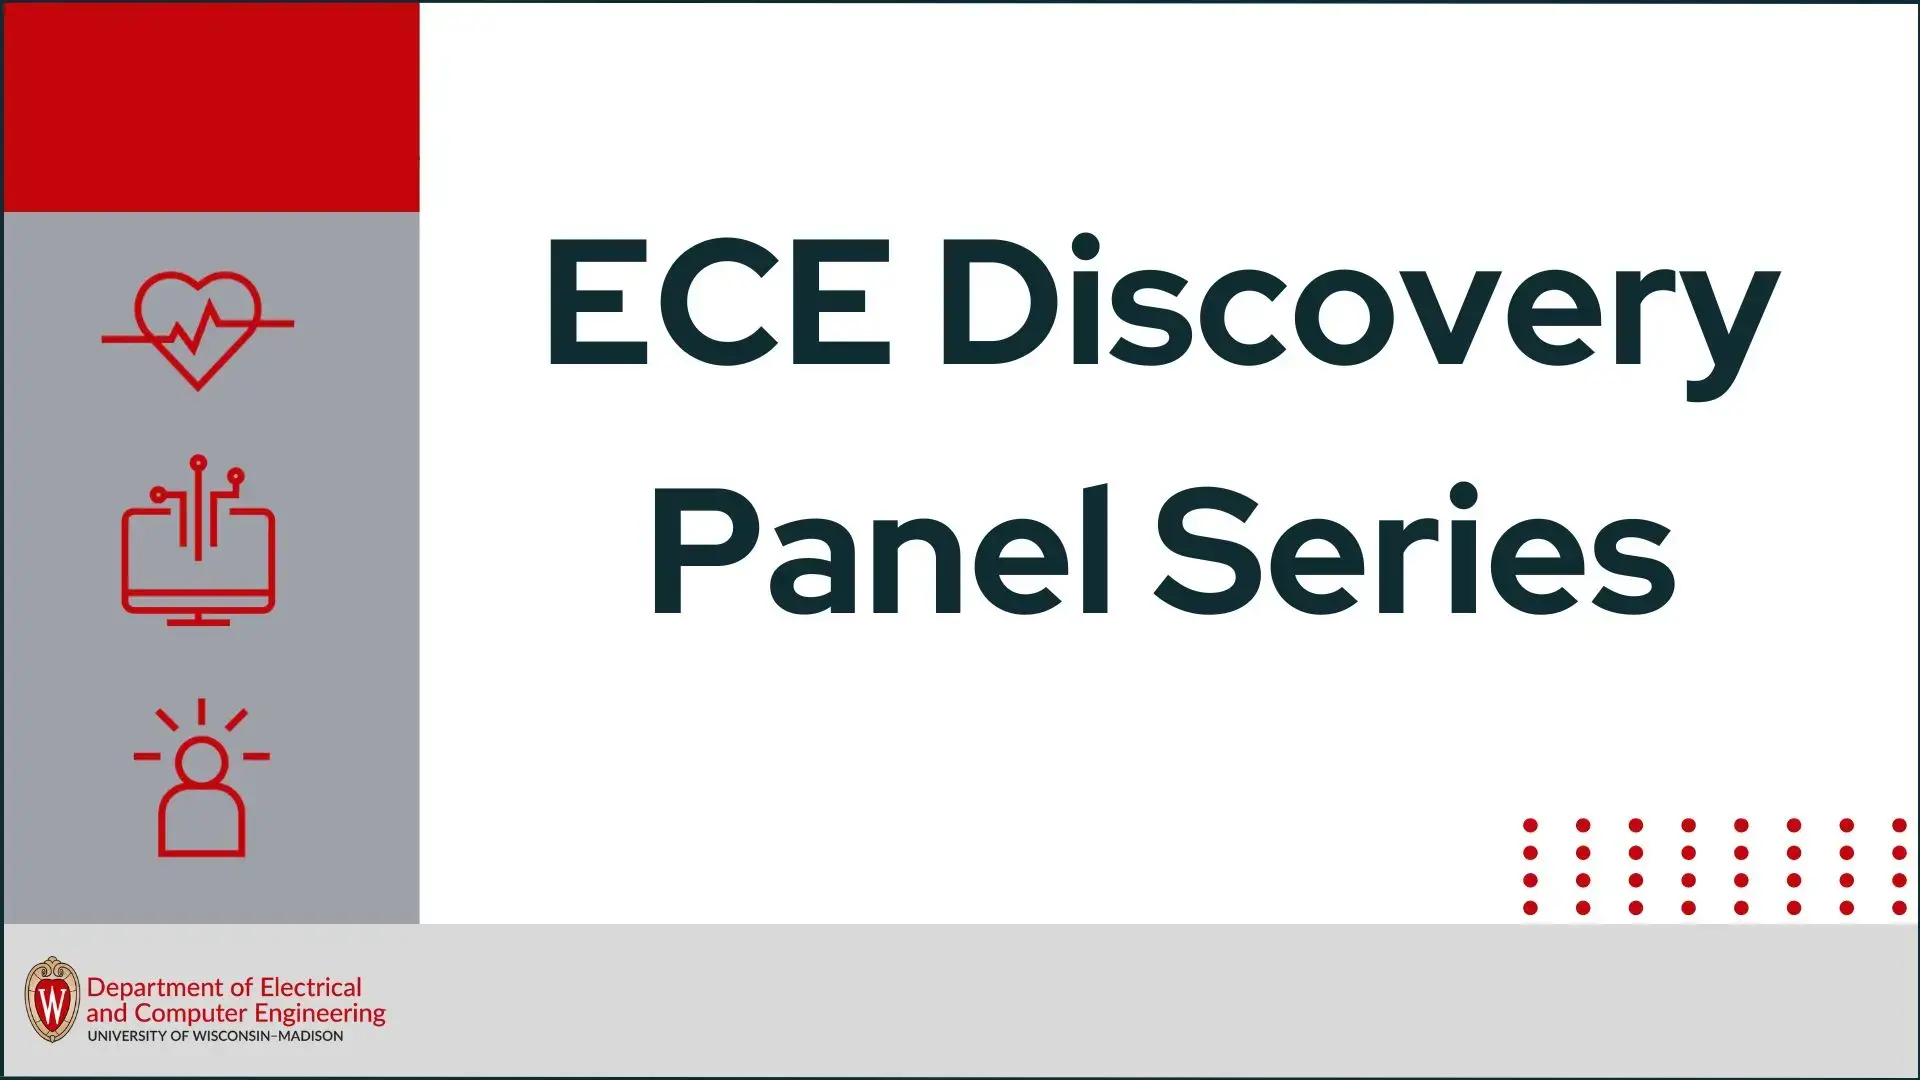 ECE Discovery Panel Series